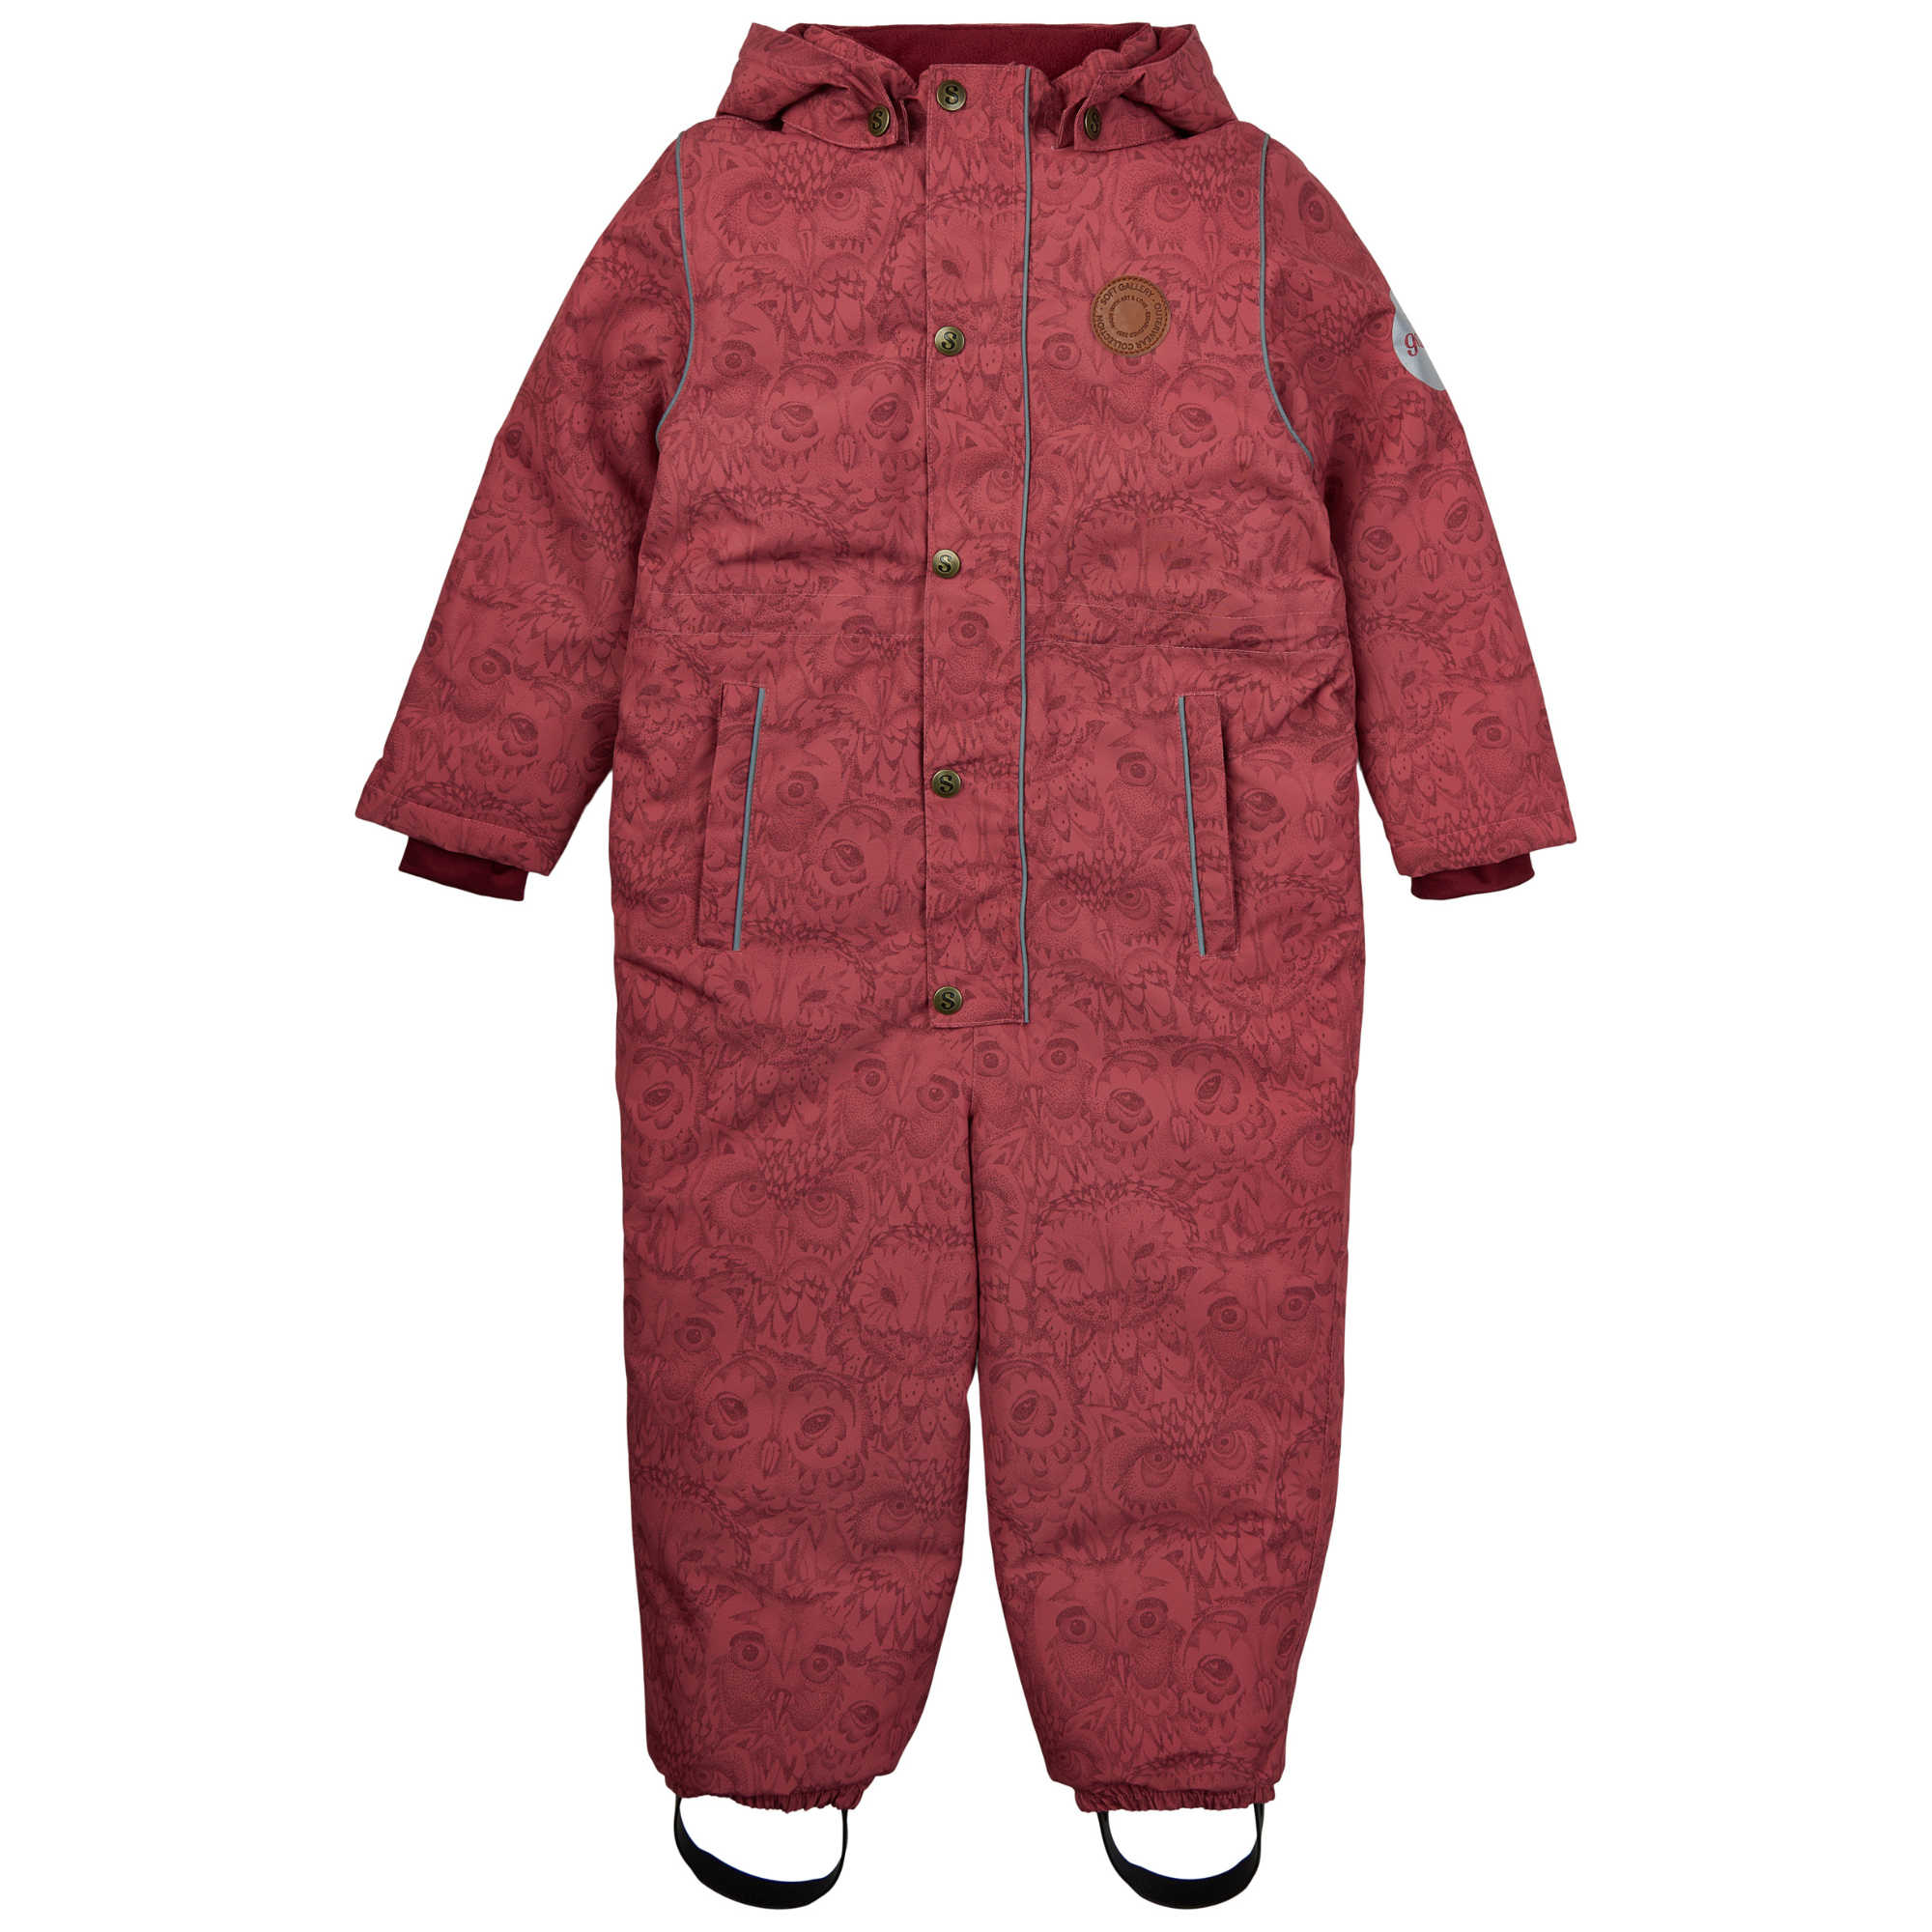 Soft Gallery - Merle Snowsuit SPE, SG2200-1 - Mineral Red / Owl